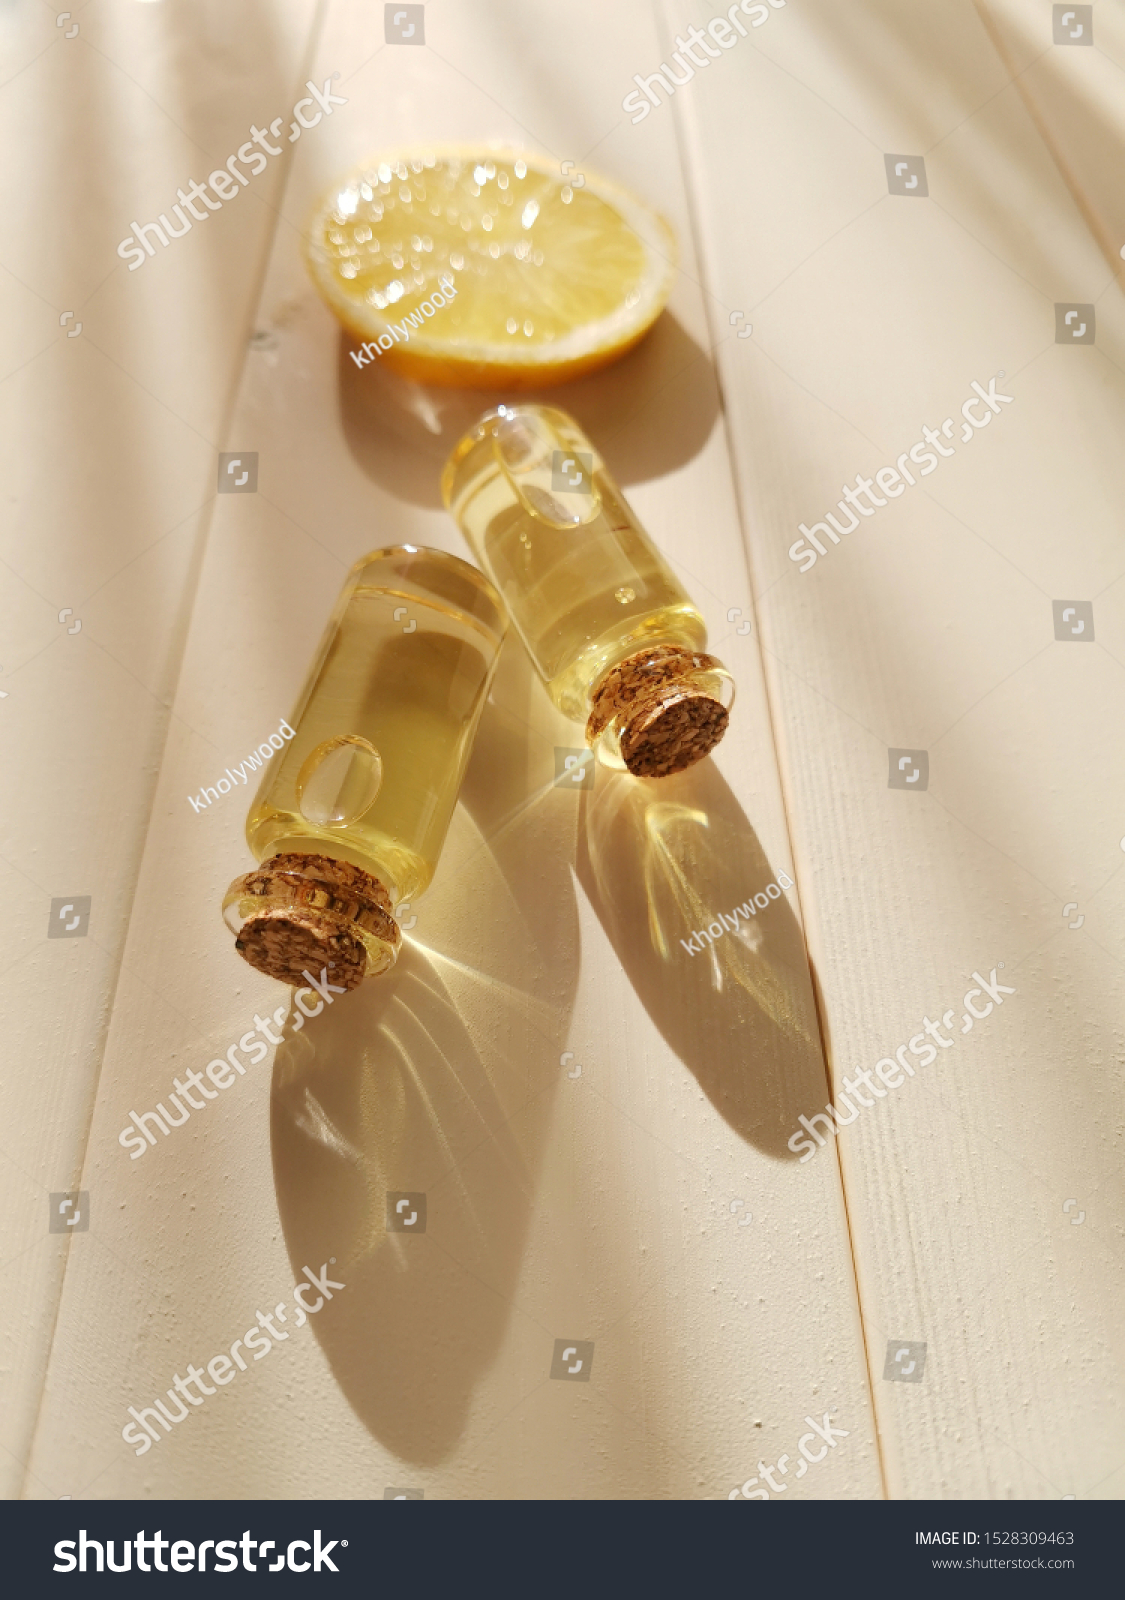 The concept of aromatherapy, relaxation, organics. Transparent bottles with essential oil, lemon on a light wooden background. Organic apothecary. Place for text. Minimalism, top view, flat lay. #1528309463